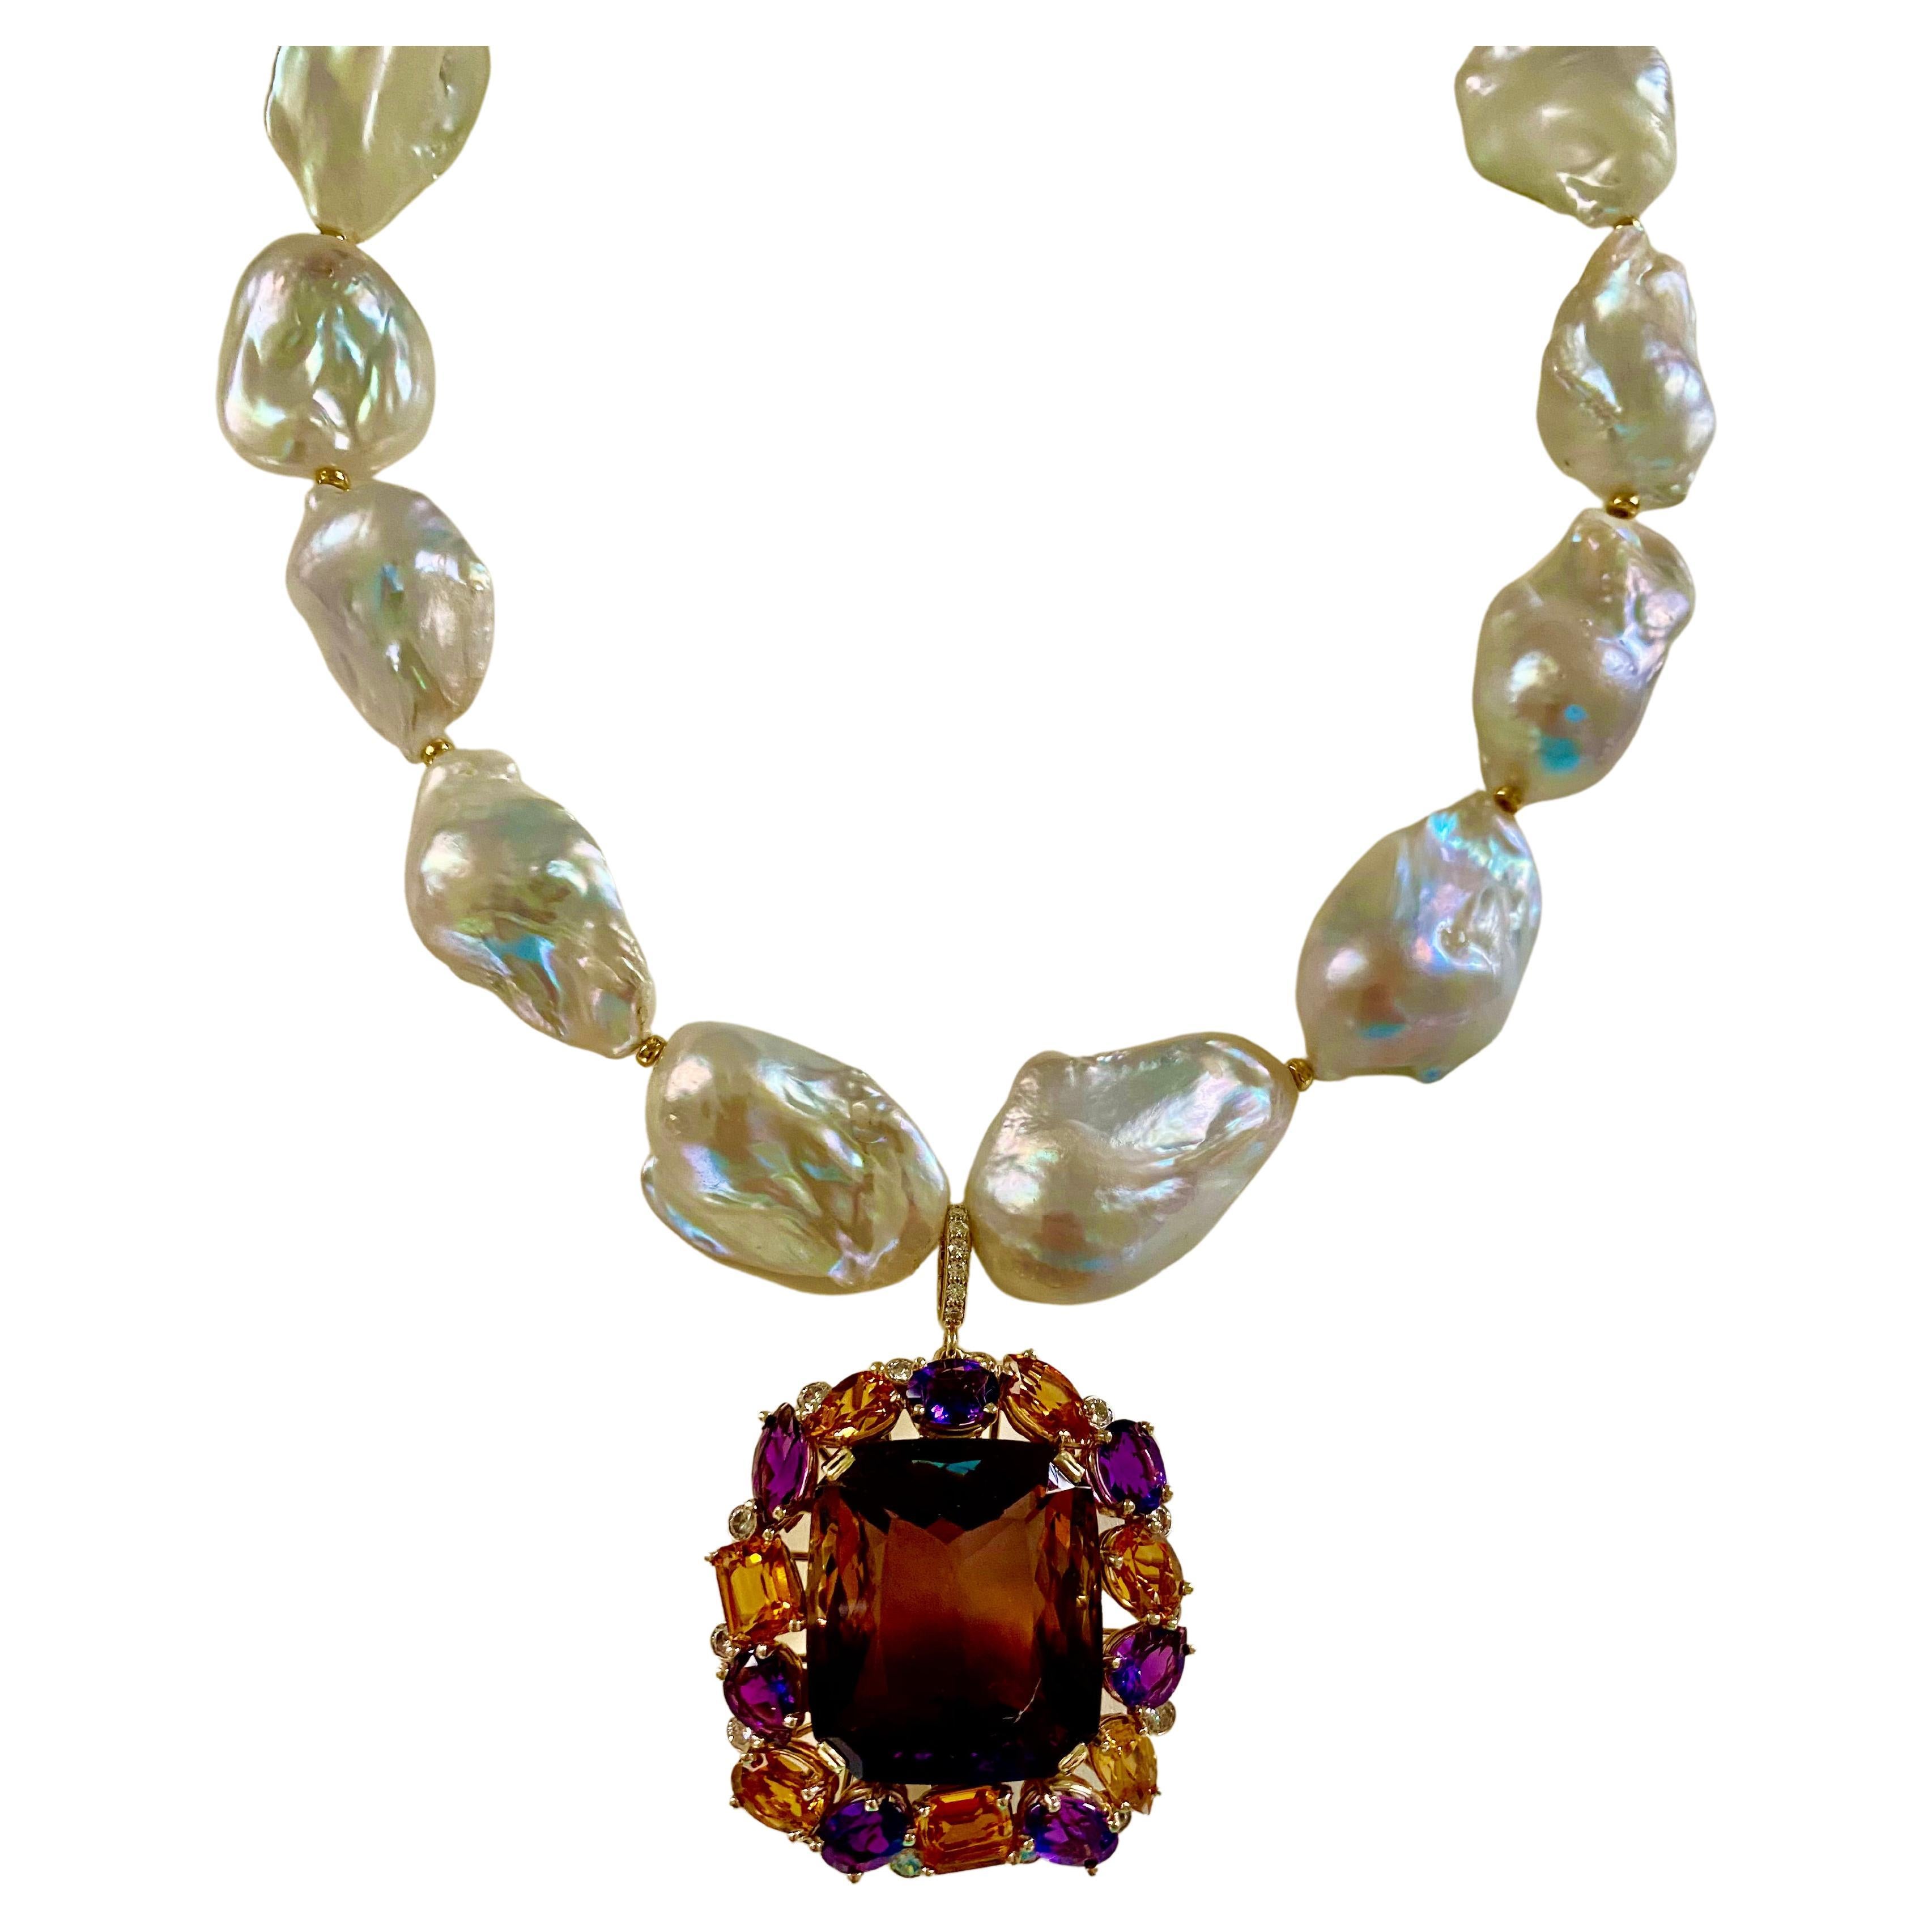 A gem quality ametrine forms the nucleus of this extravagant, one-of-a-kind necklace.  The ametrine (origin: Bolivia) weighs 72.76 carats and is richly colored in both purple and yellow.  The gem is well cut and polished in a modified cushion cut.